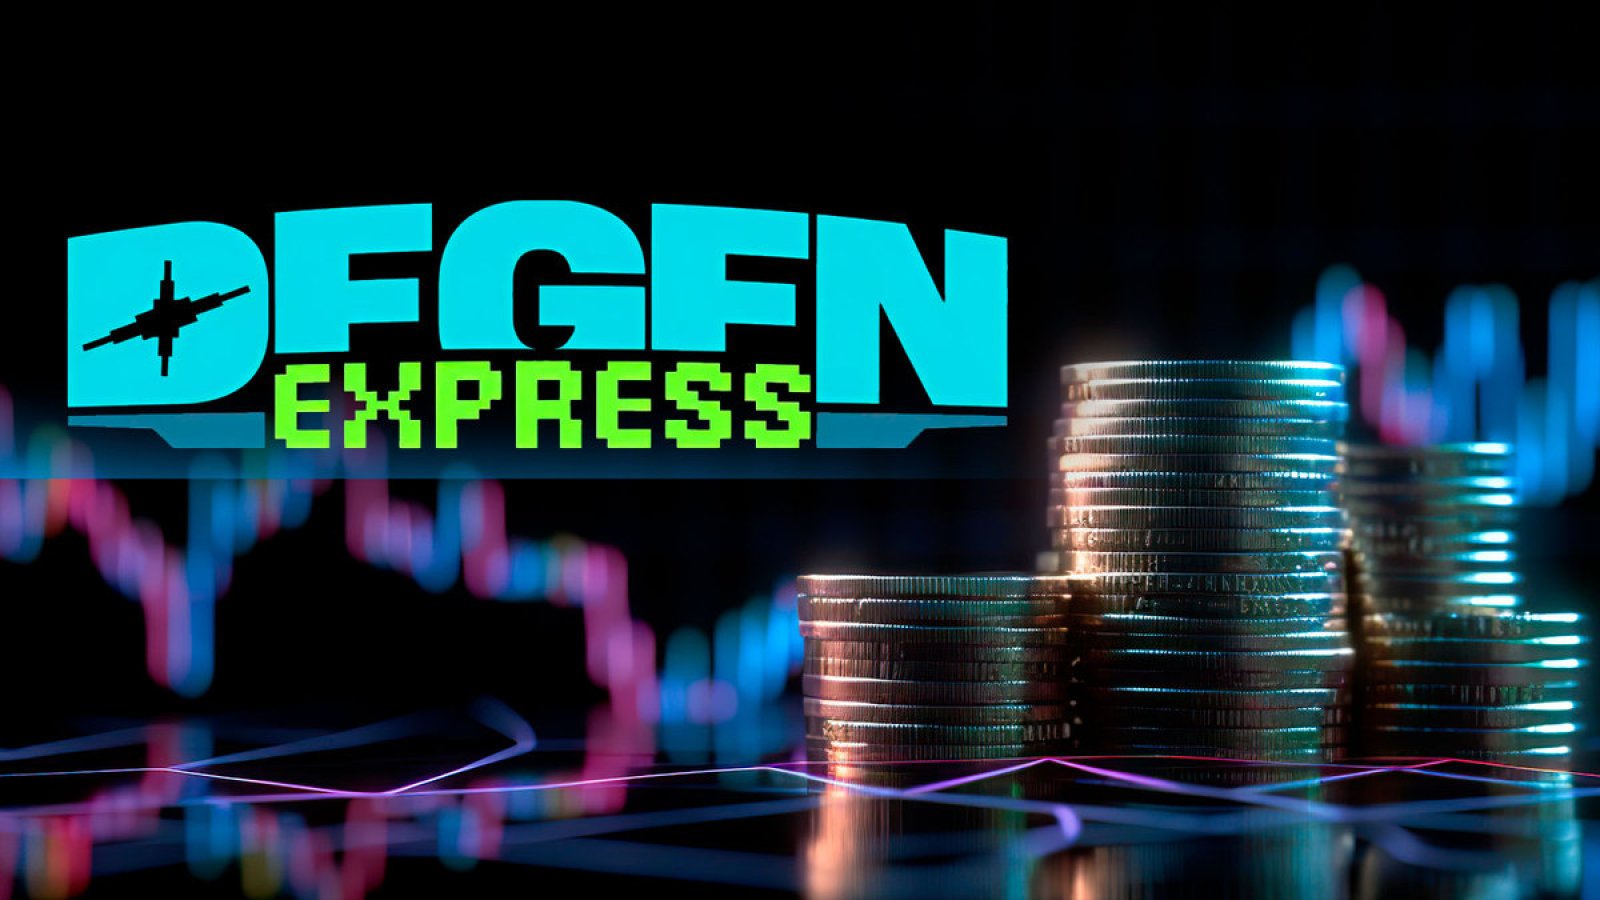 Degen Express Introduces Pioneering Launchpad for Fantom, Base Meme Coins